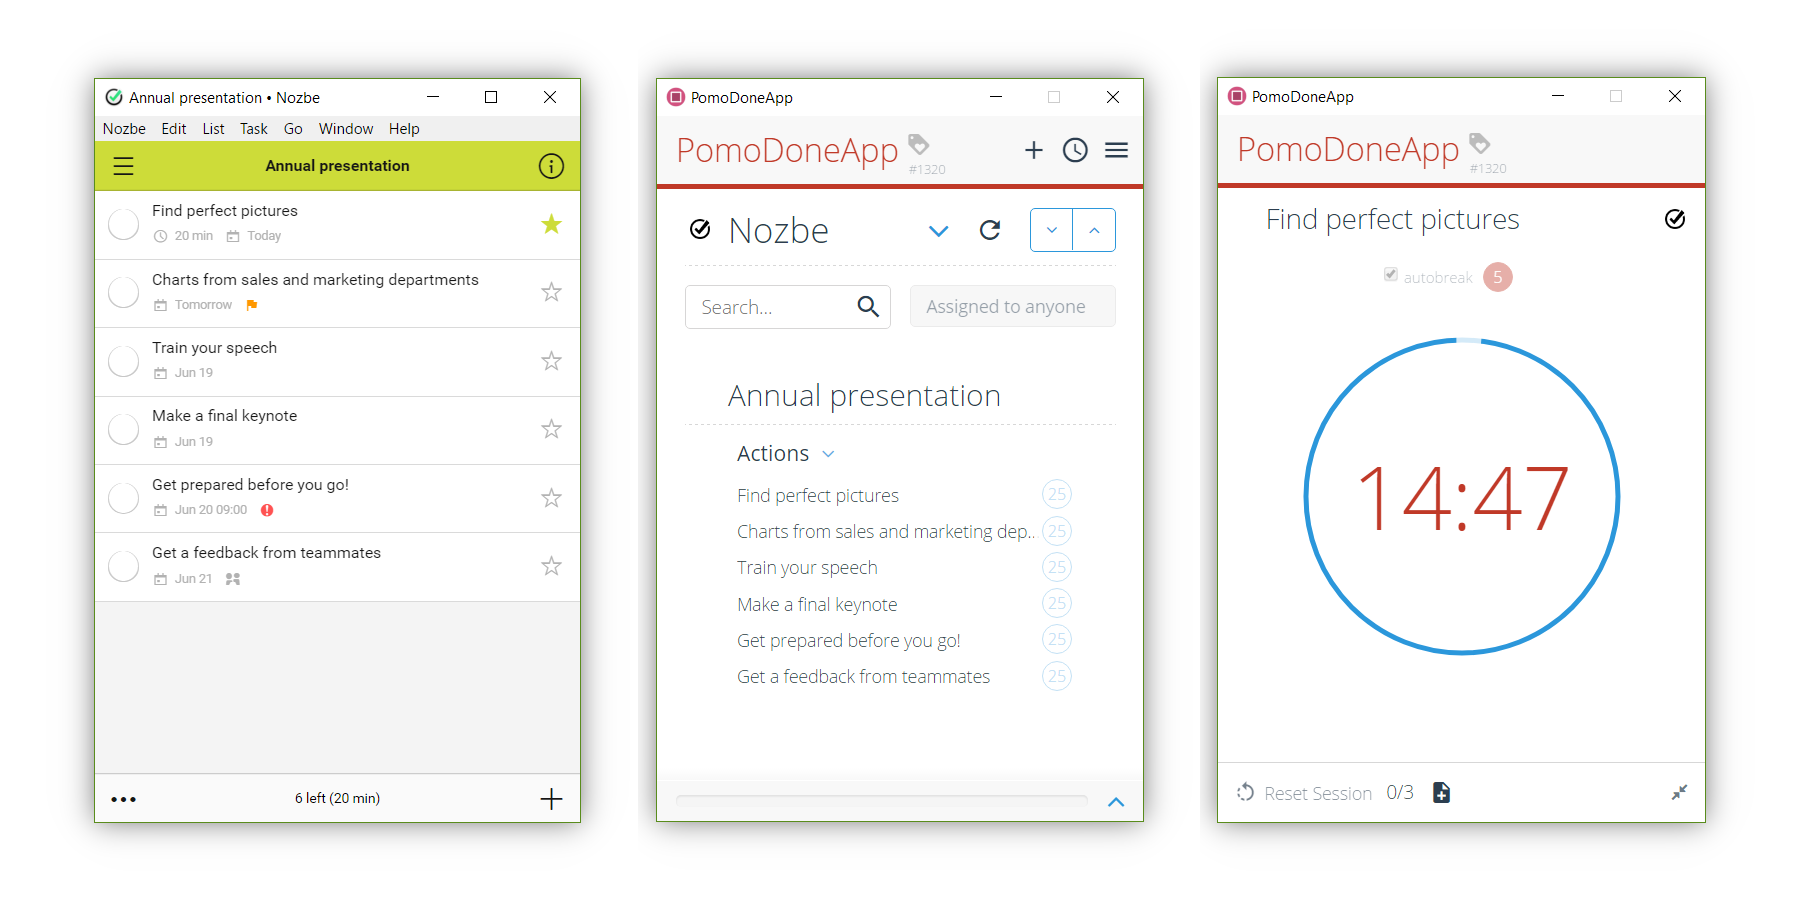 Both Nozbe and RoundPie are available as web-browser and standalone apps on multiple devices